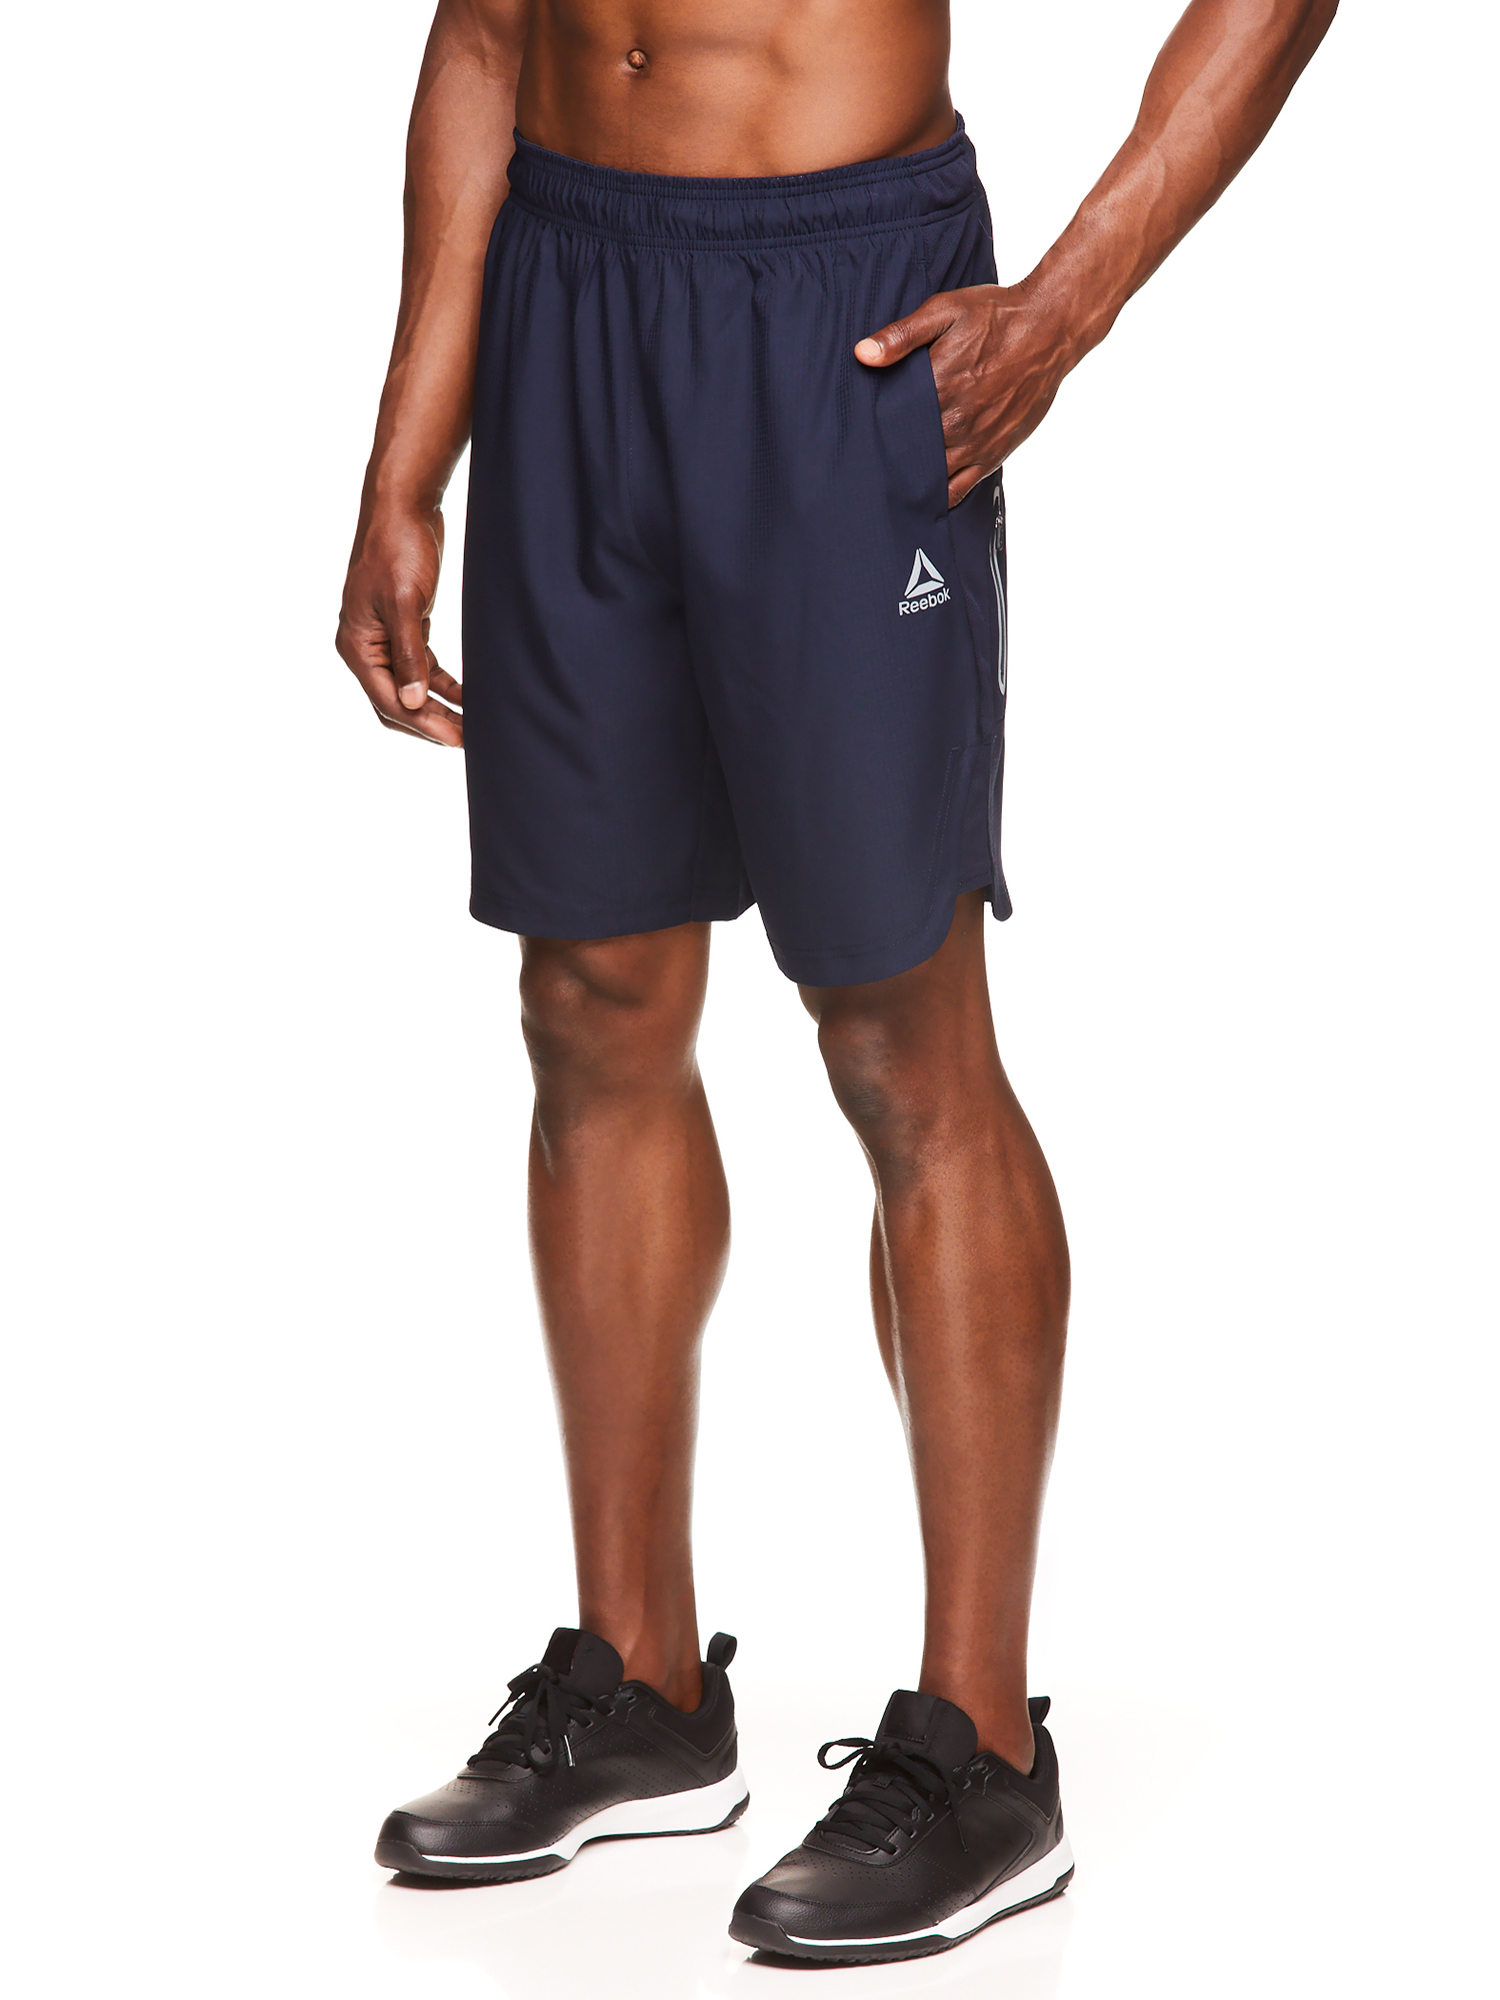 Reebok Men's and Big Men's Active Textured Woven Shorts, 9" Inseam, up to Size 3XL - image 3 of 4